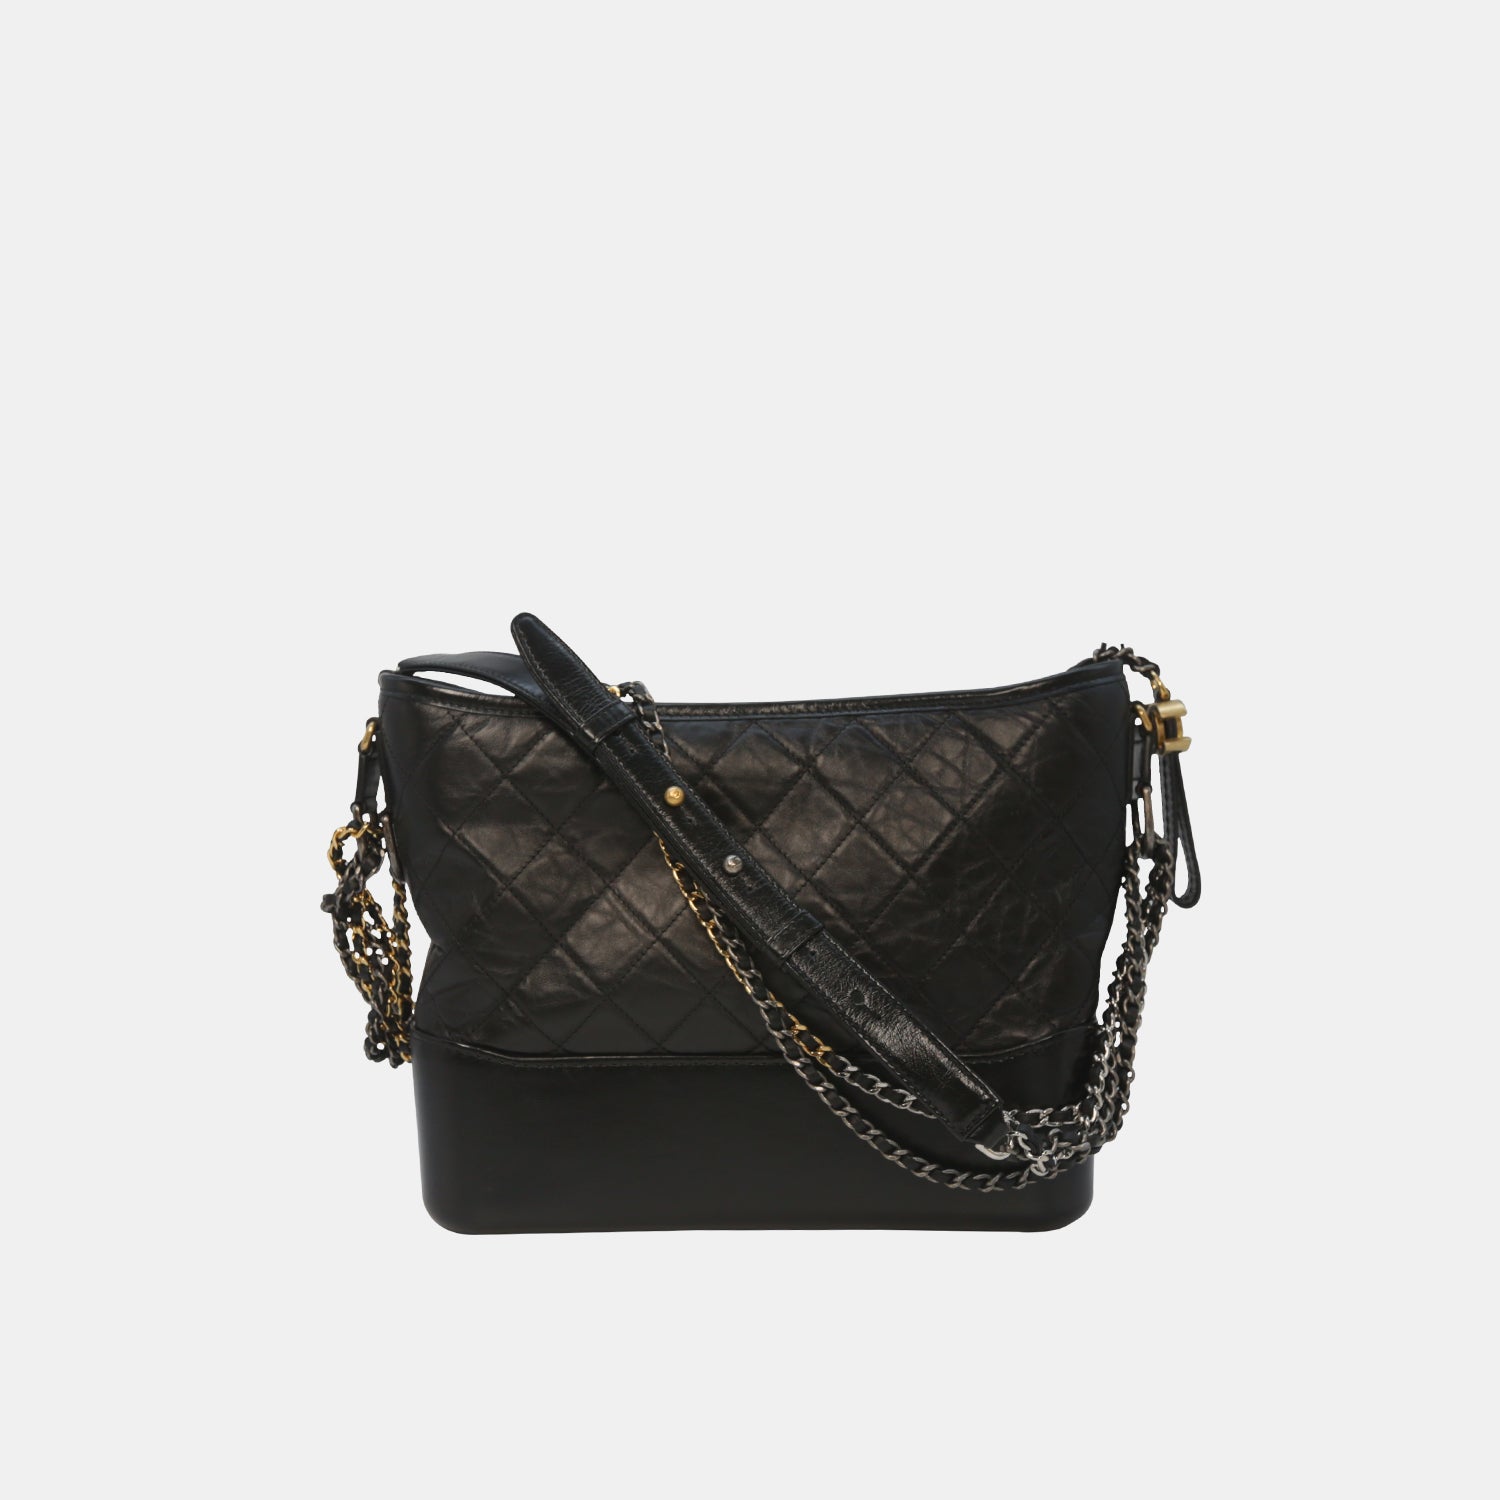 Chanel Gabrielle Hobo Bag Diamond Gabrielle Quilted Aged/Smooth Small Black